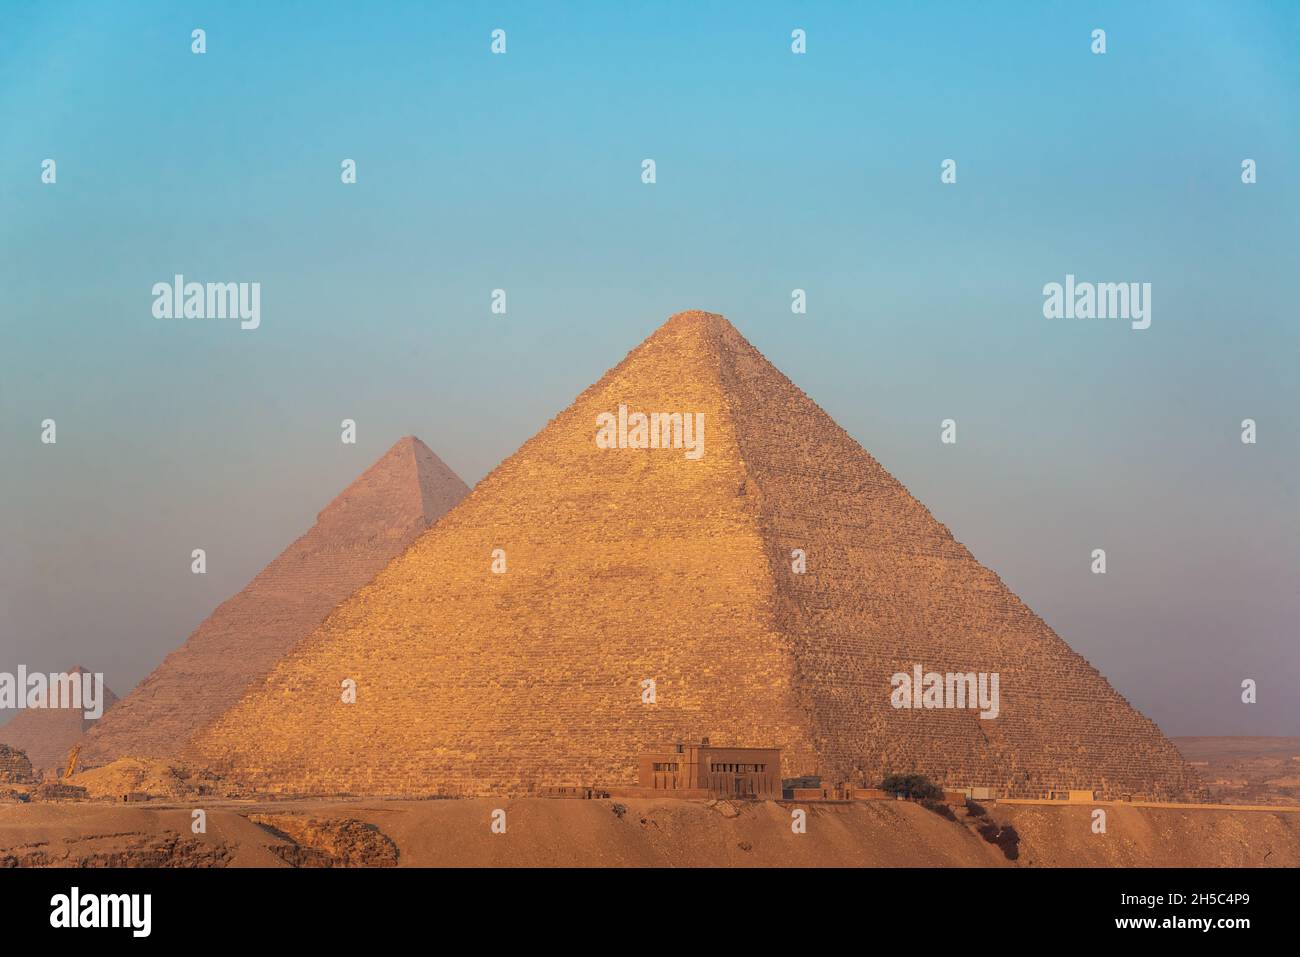 View of the Pyramids of Giza in Egypt Stock Photo